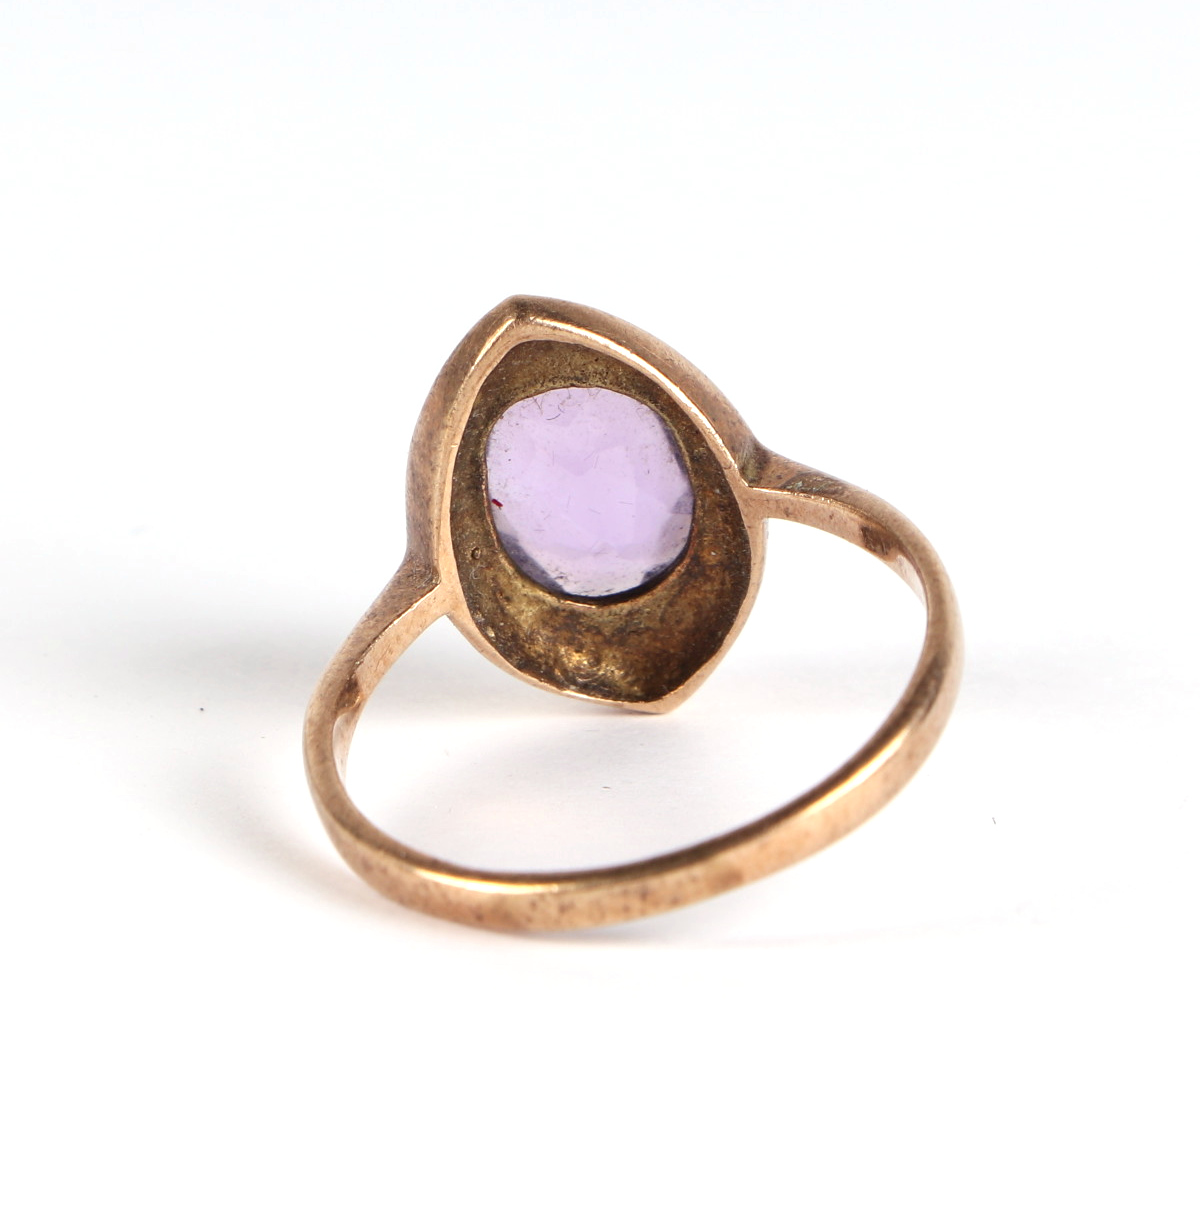 A 9ct gold amethyst ring, Birmingham 1924, 2.9g, approx. UK size Q - Image 4 of 5